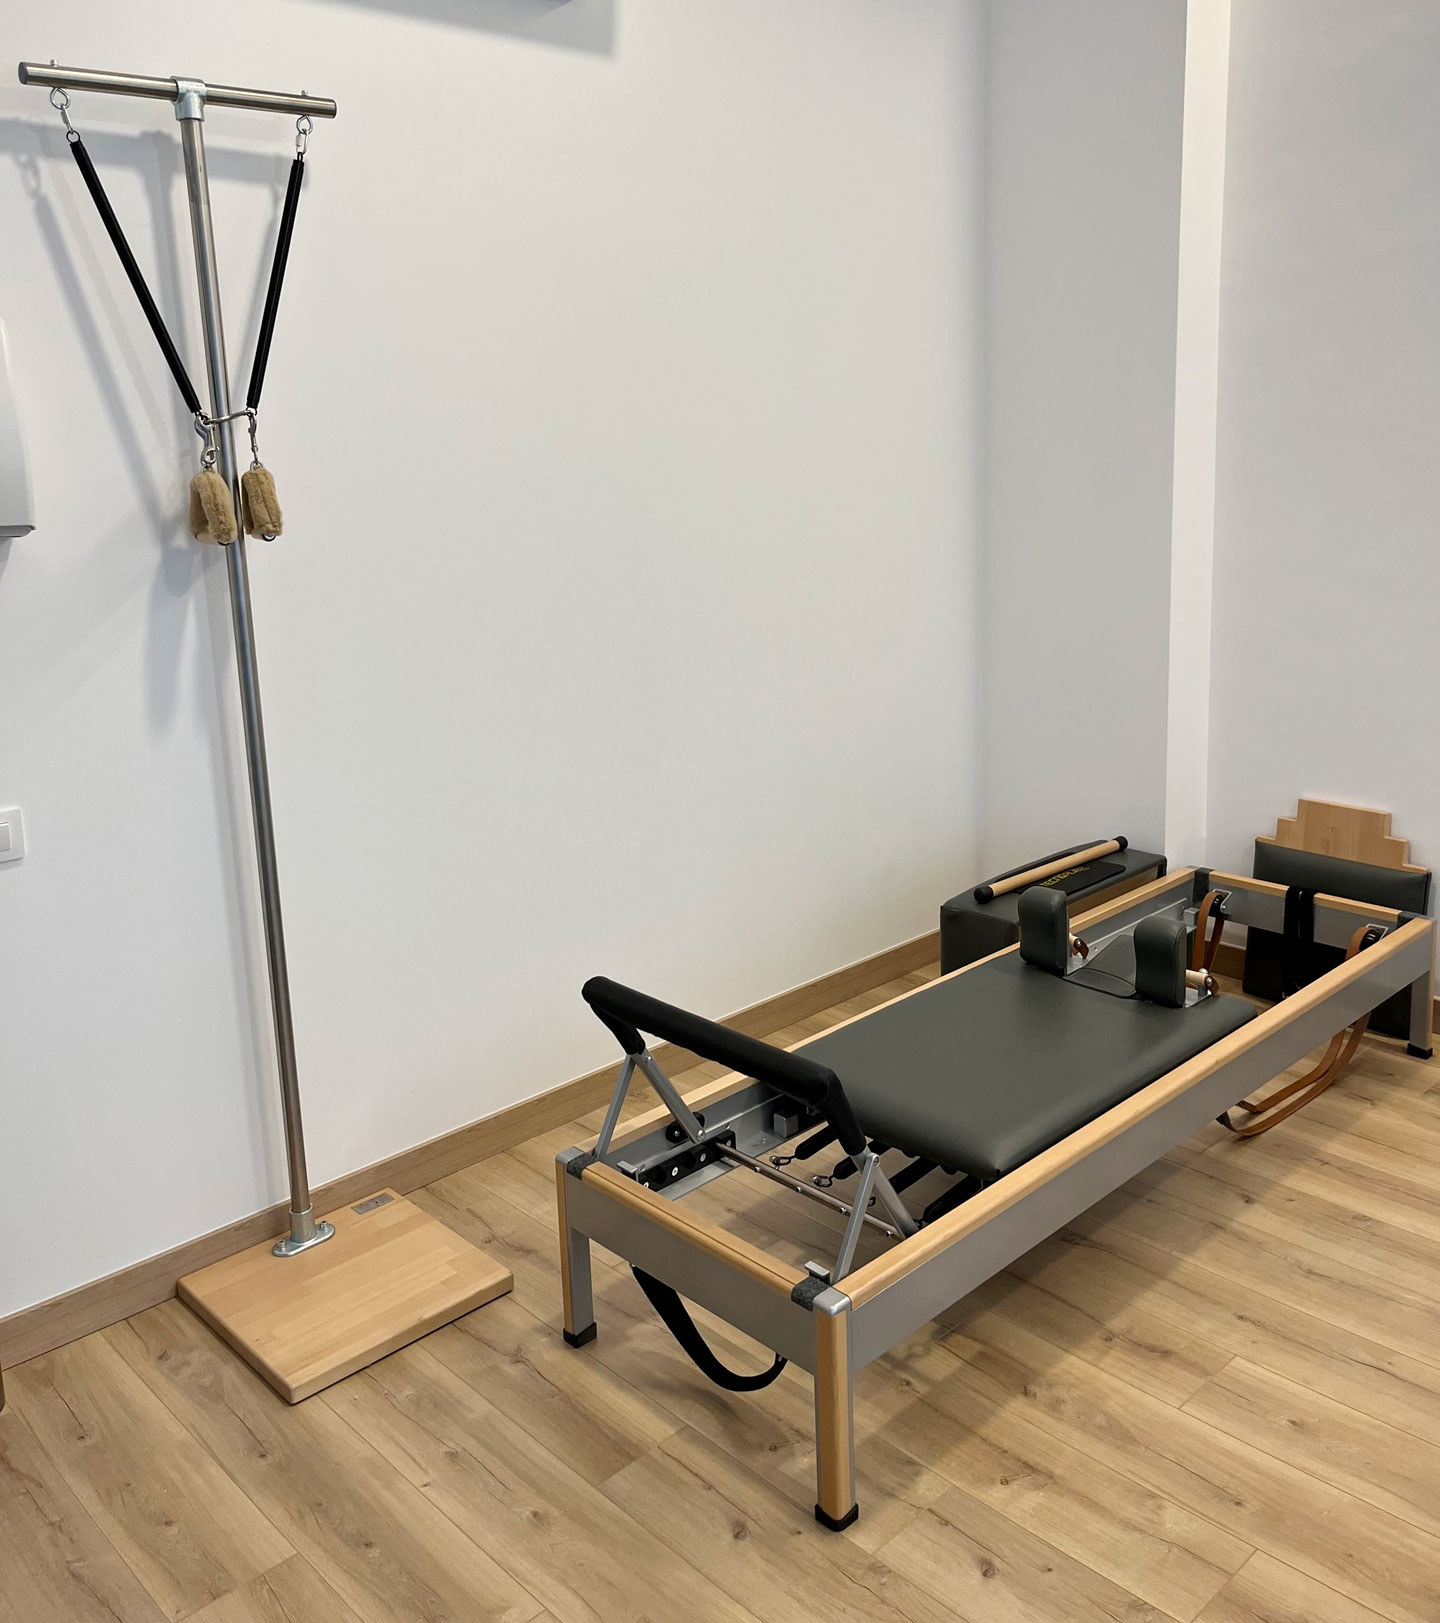 My Motion - Pilates, Fisioterapia & Personal Training